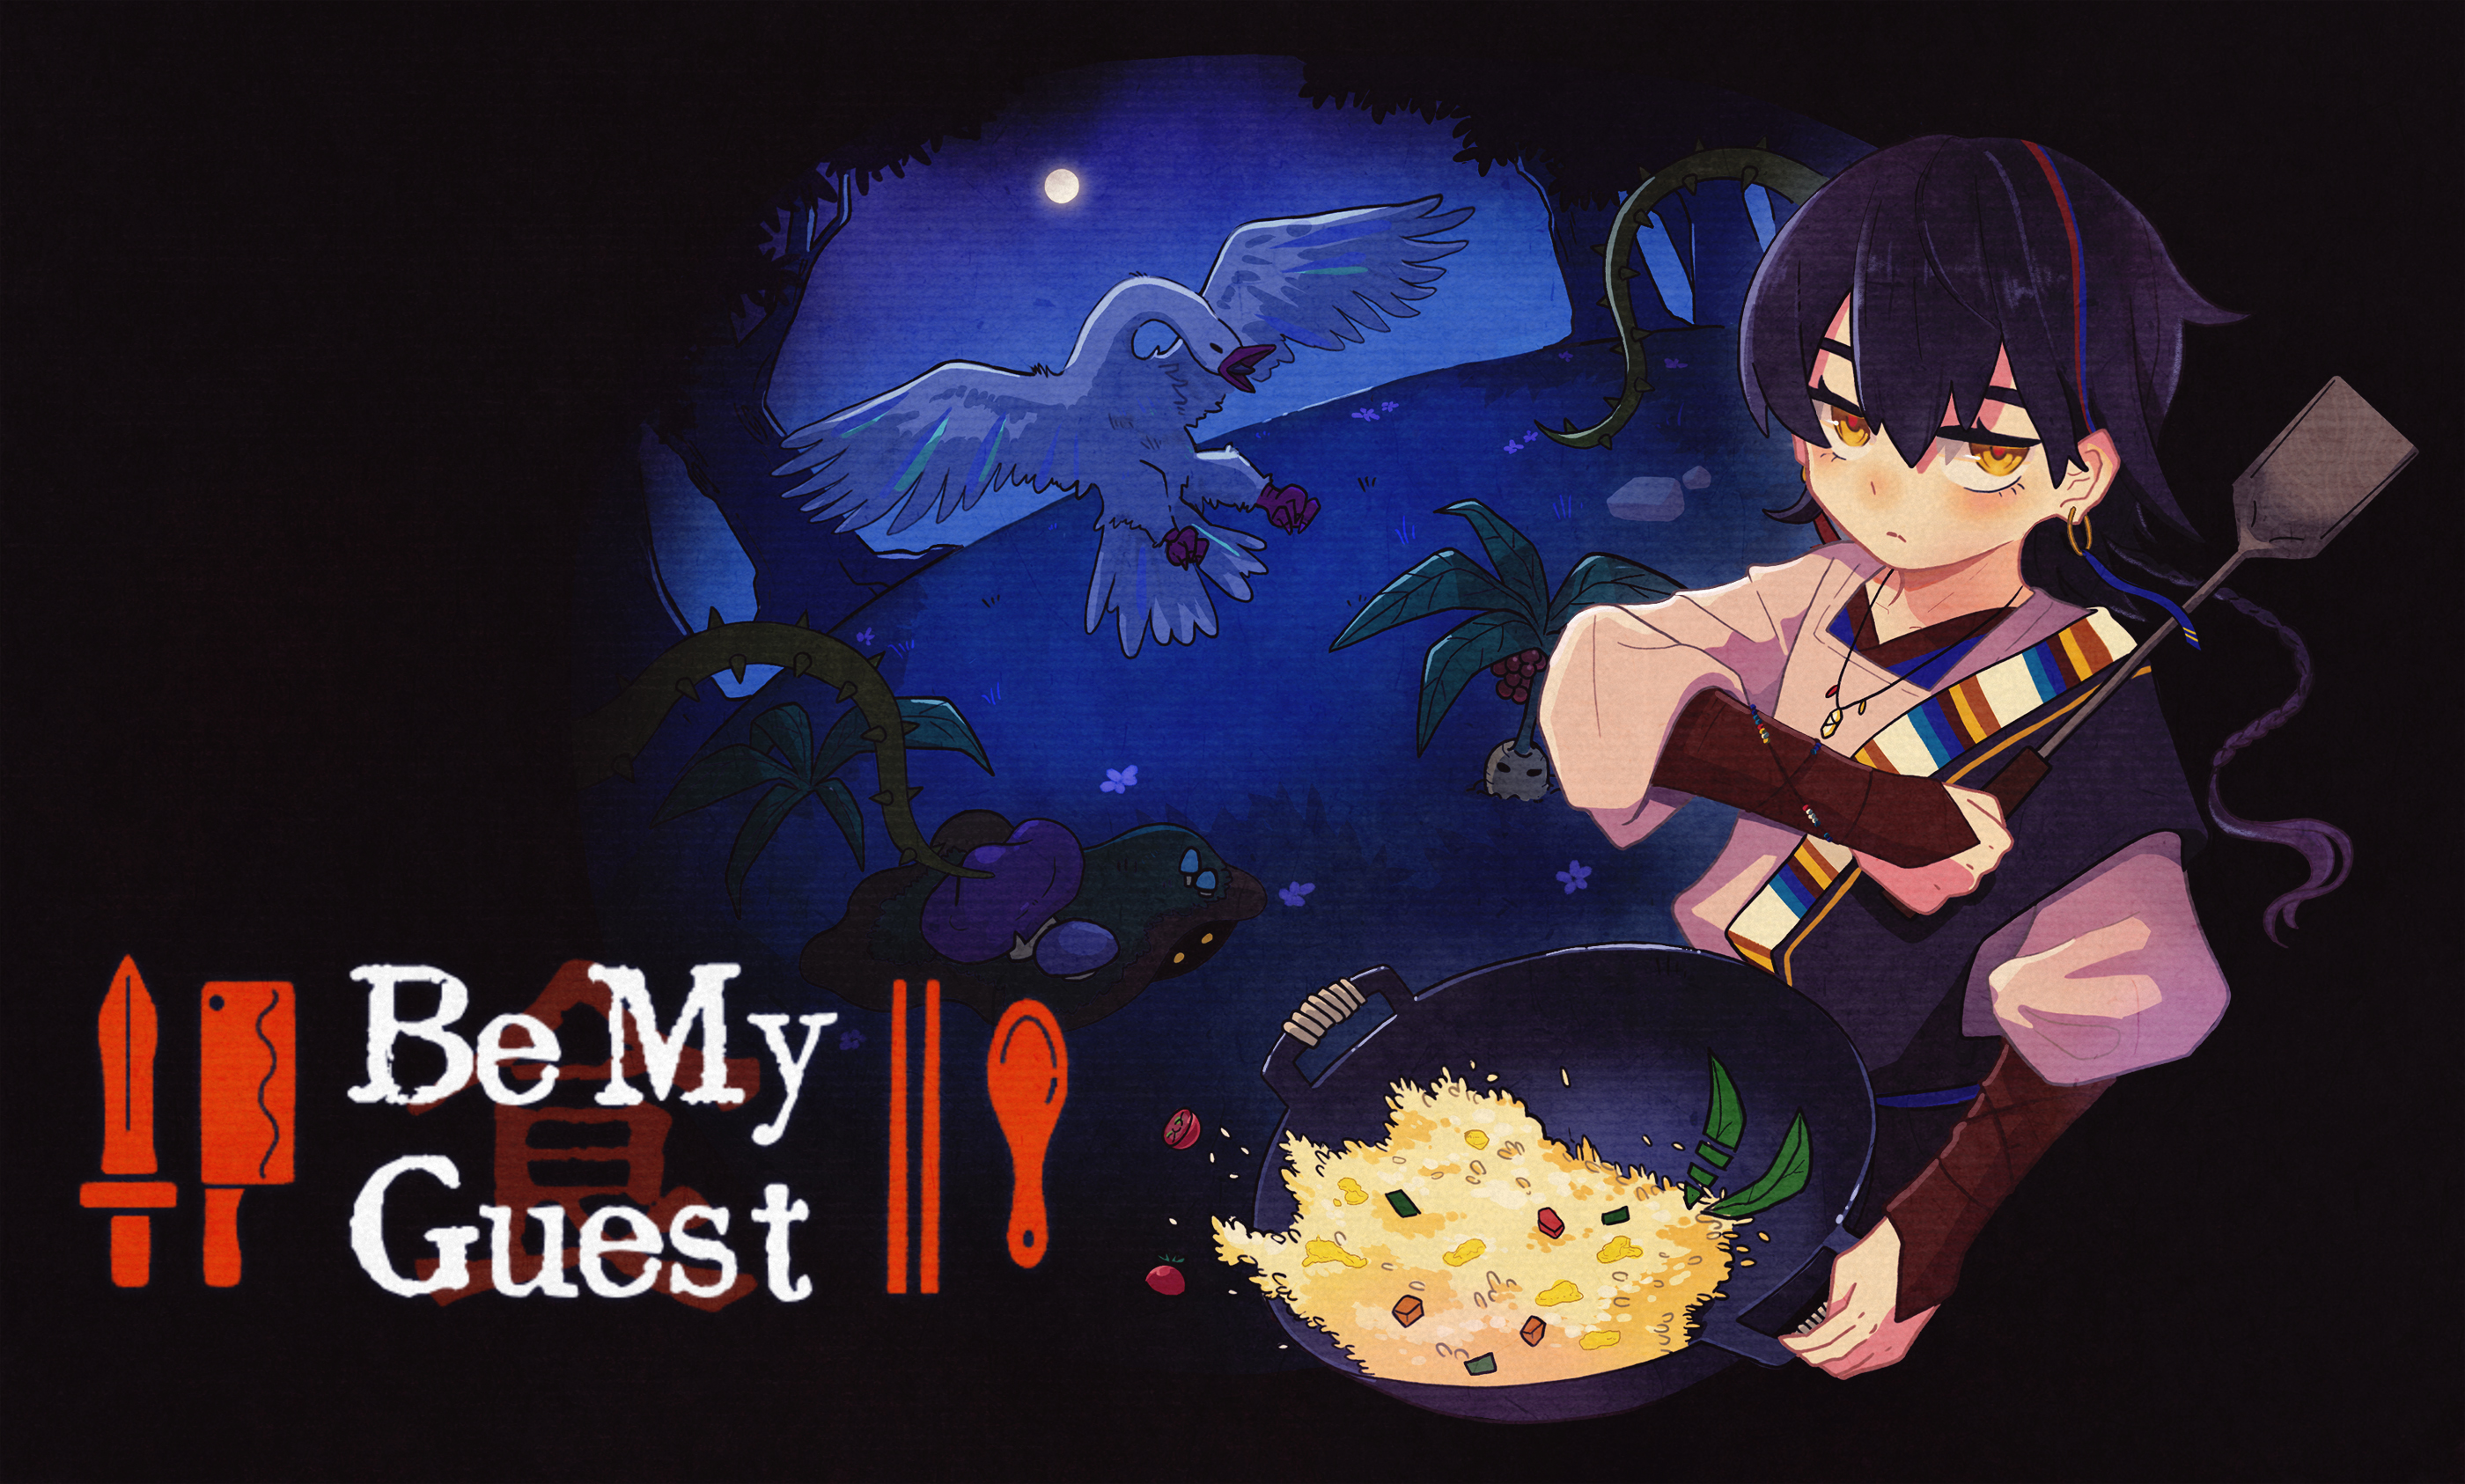 Be My Guest 以食会友